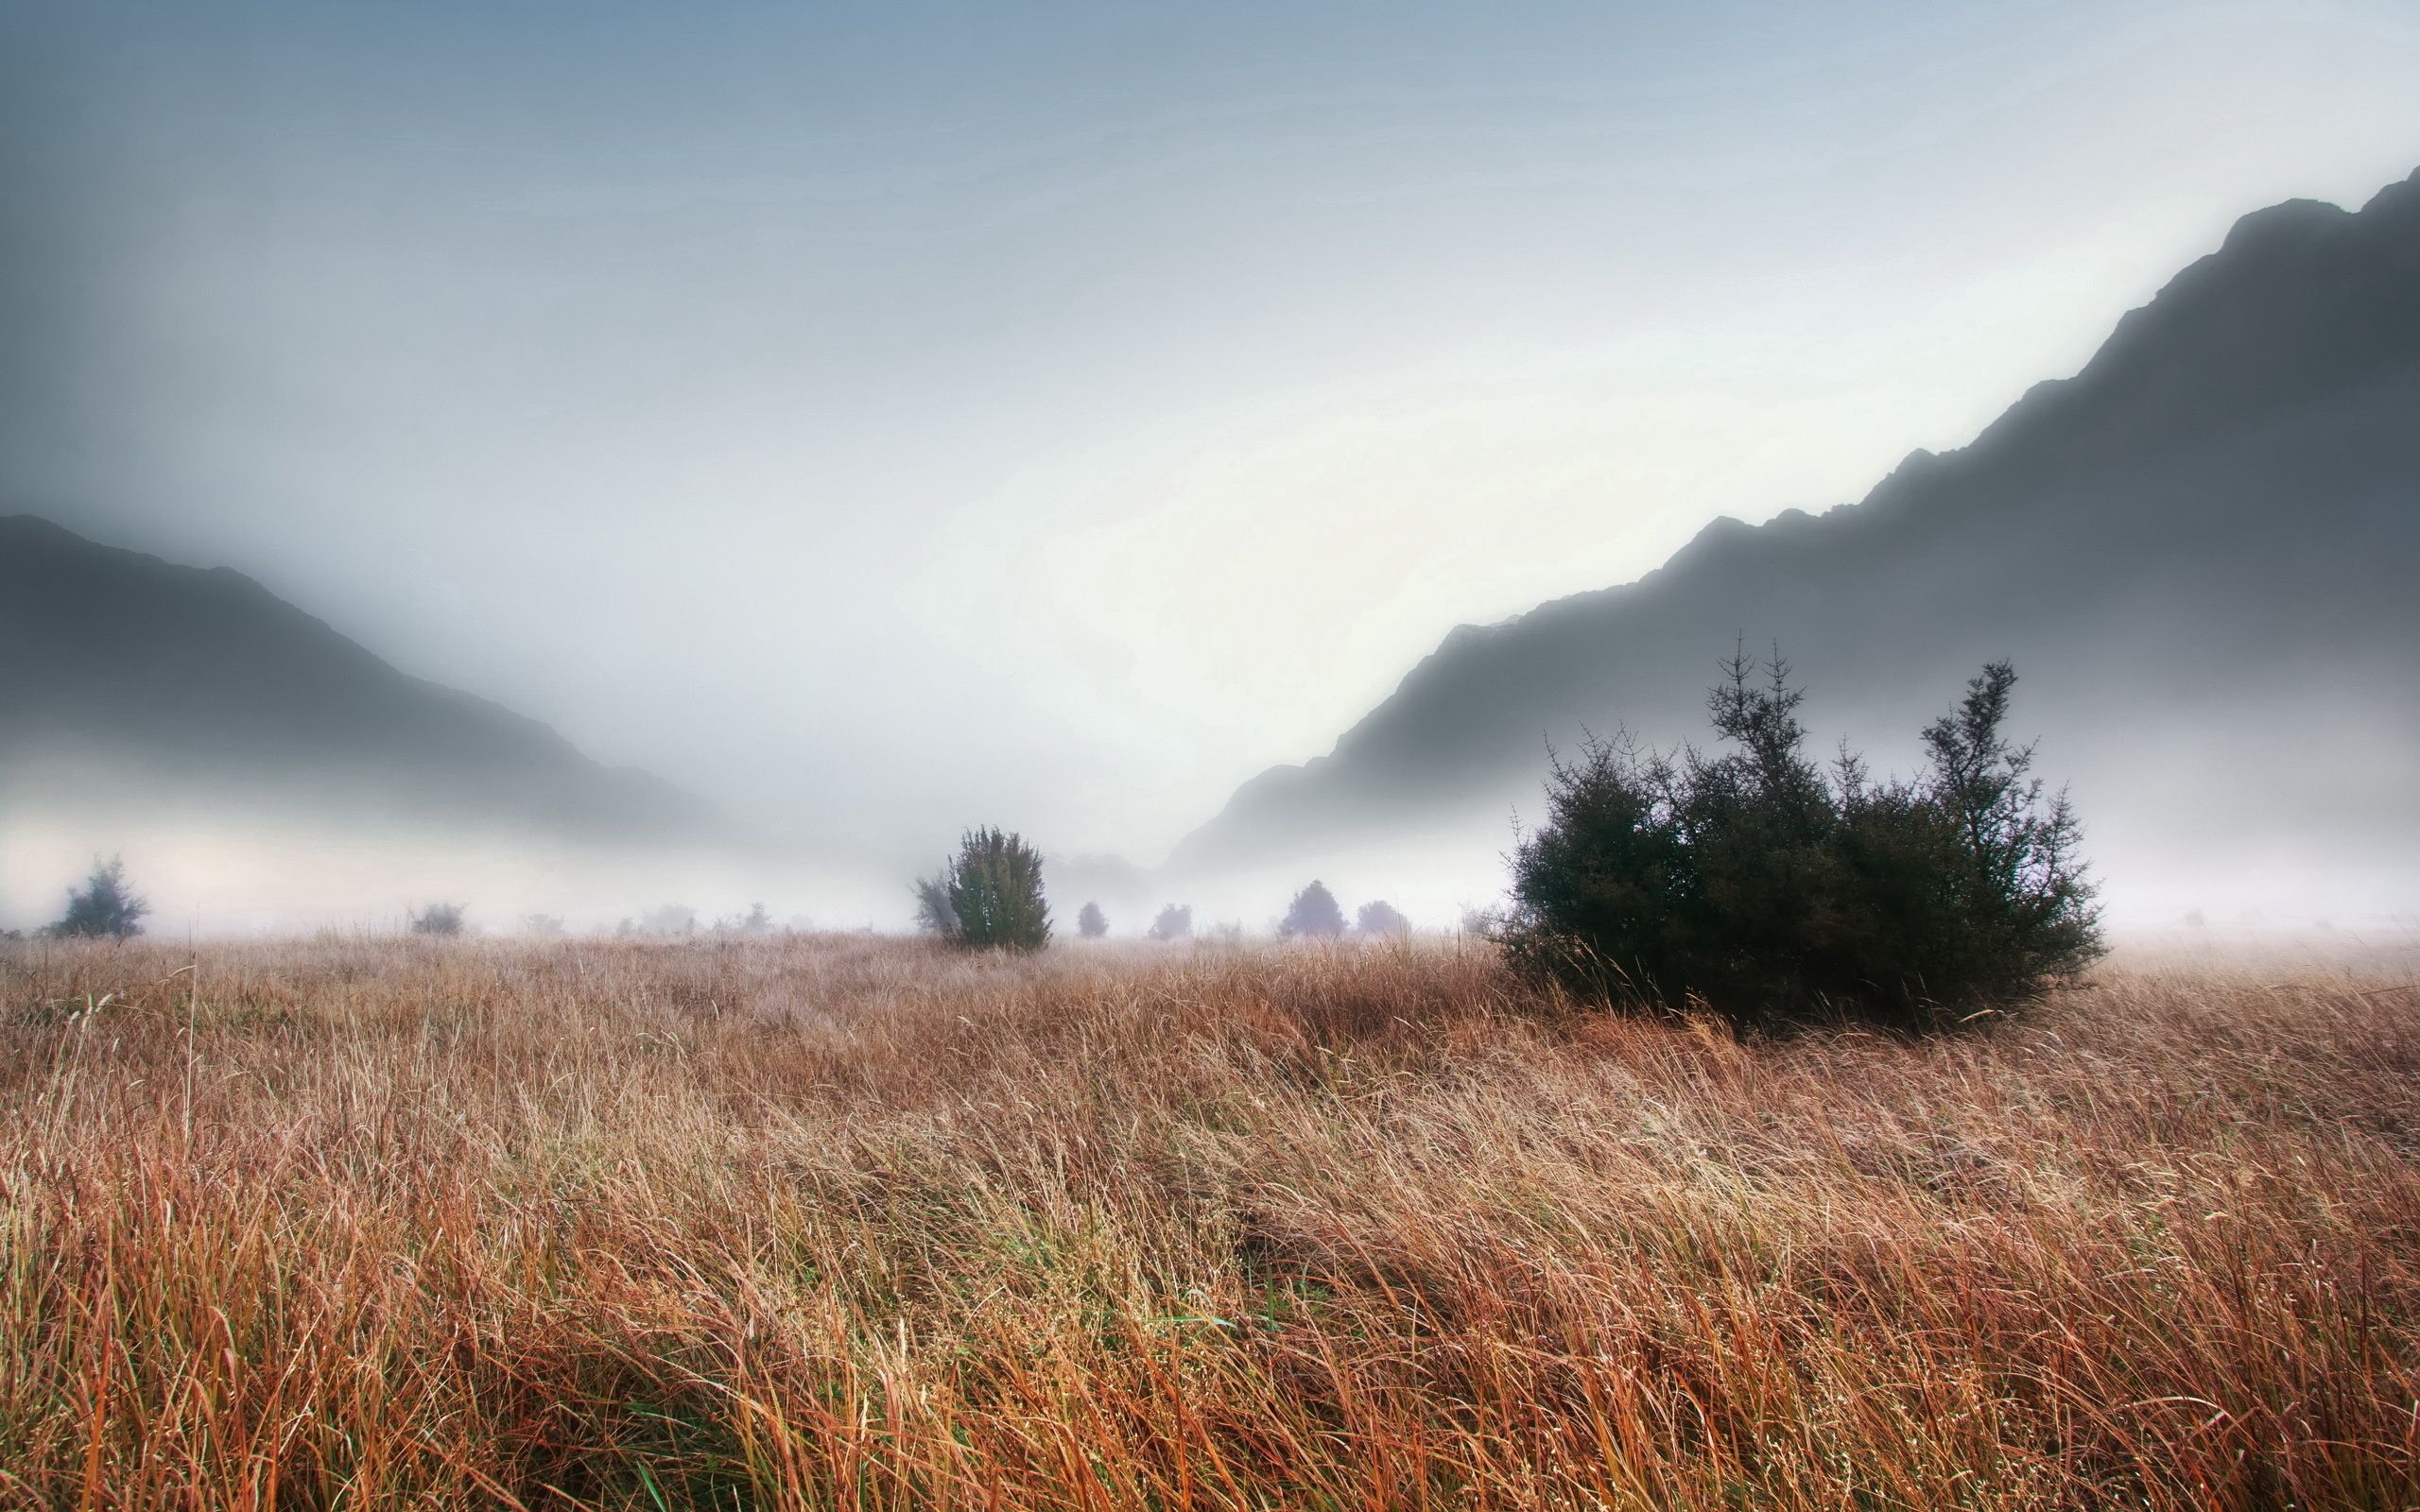 fog, gloomy, thick, mountains, it's a sly, creepy, haze, grass, ate, nature, withered, autumn